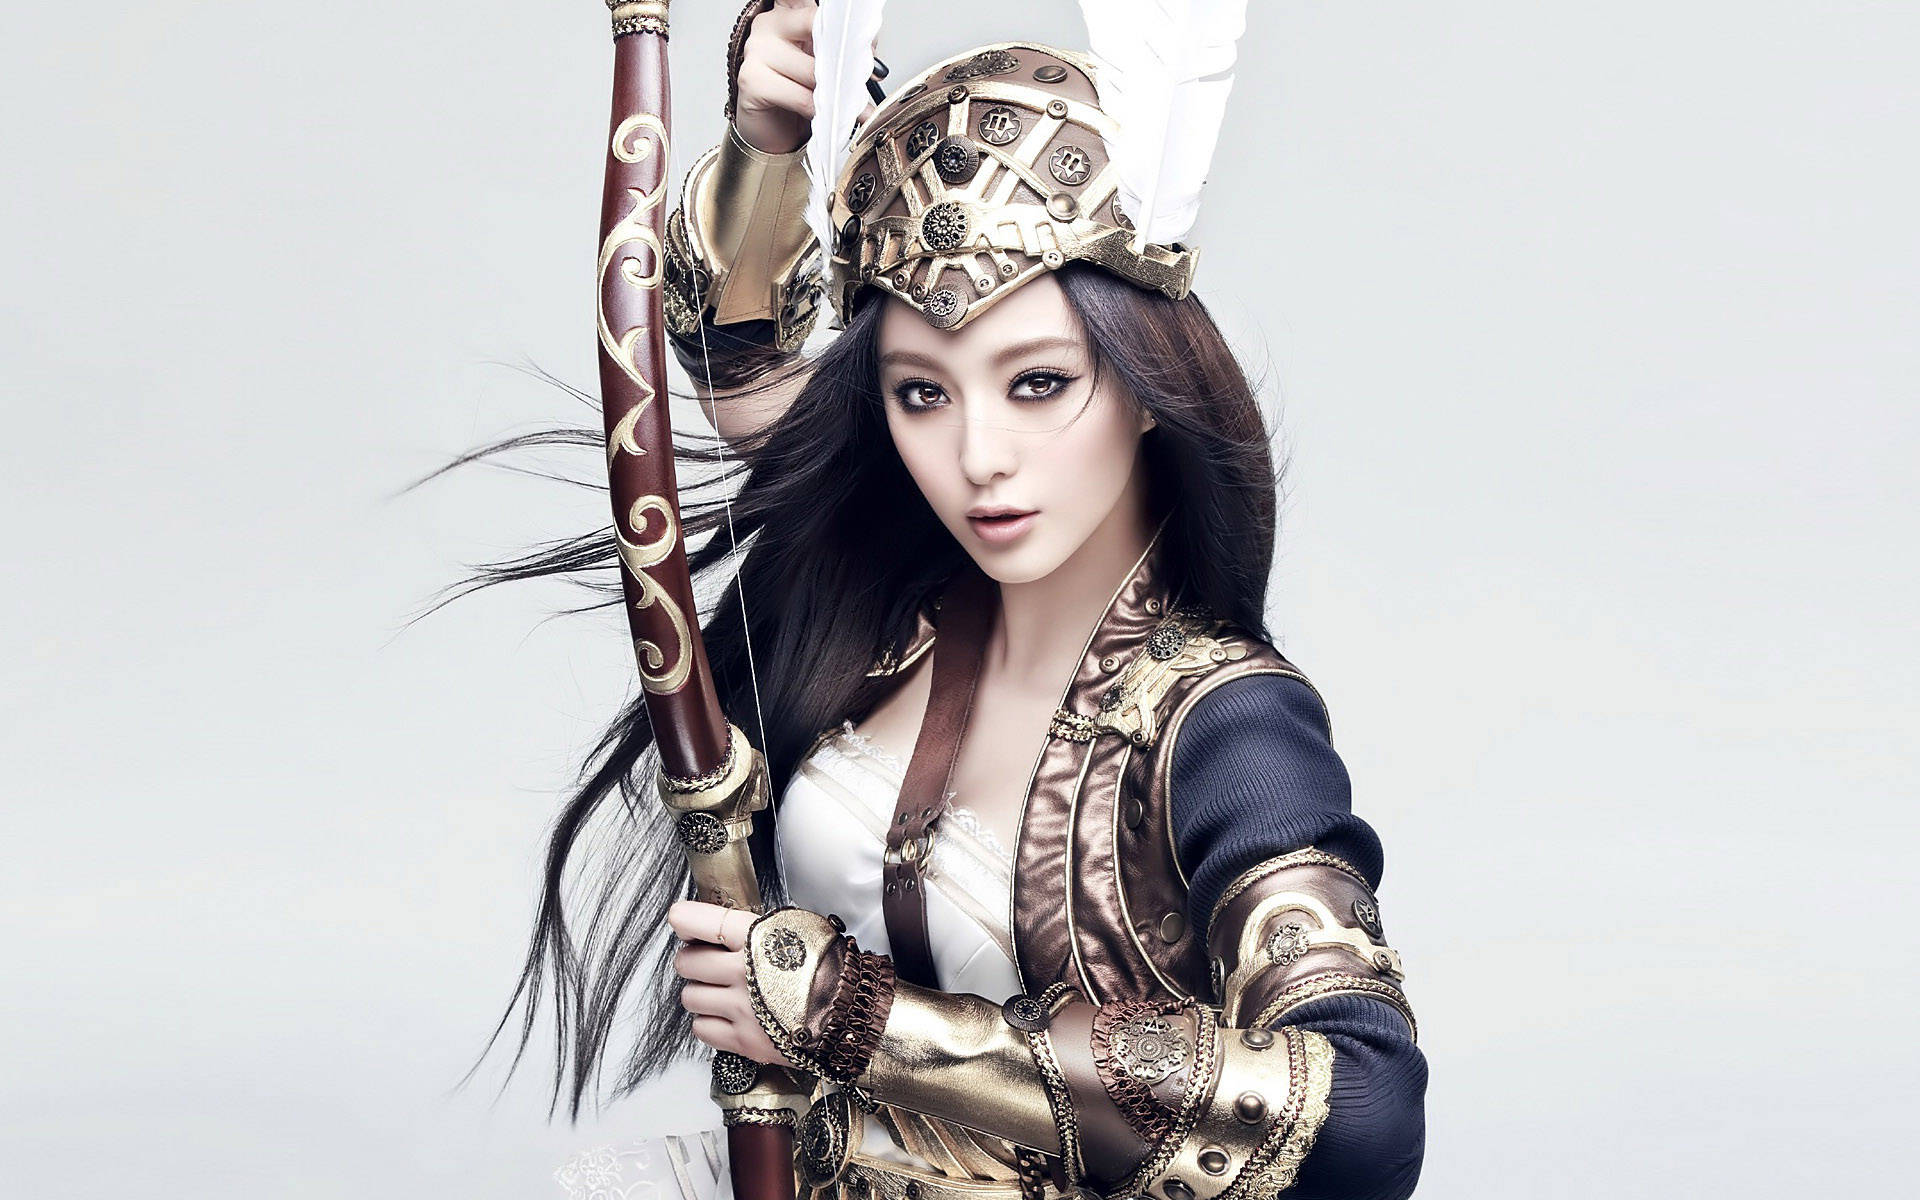 Chinese Woman In Warrior Outfit Wallpaper